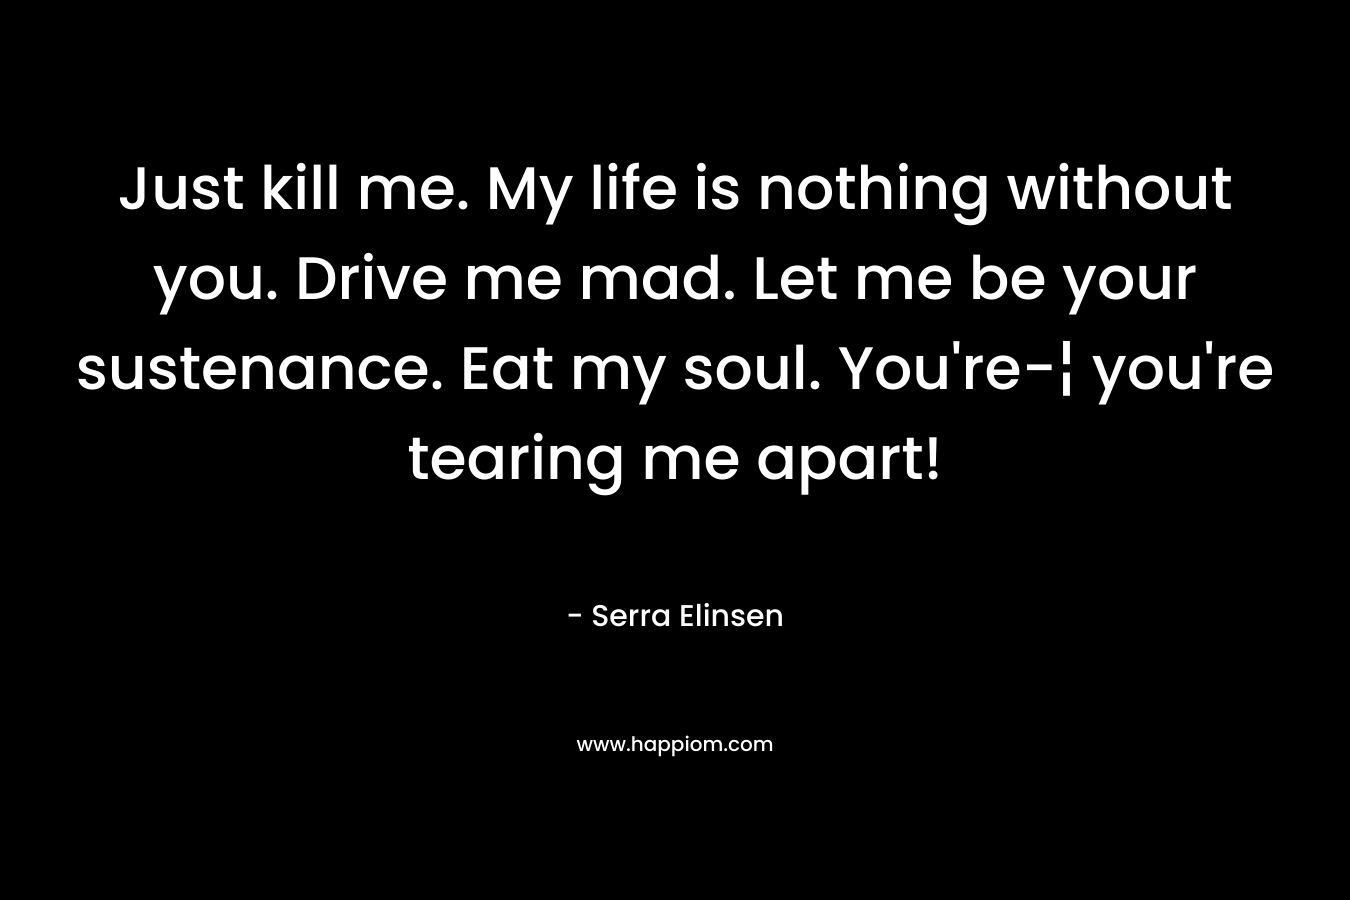 Just kill me. My life is nothing without you. Drive me mad. Let me be your sustenance. Eat my soul. You’re-¦ you’re tearing me apart! – Serra Elinsen